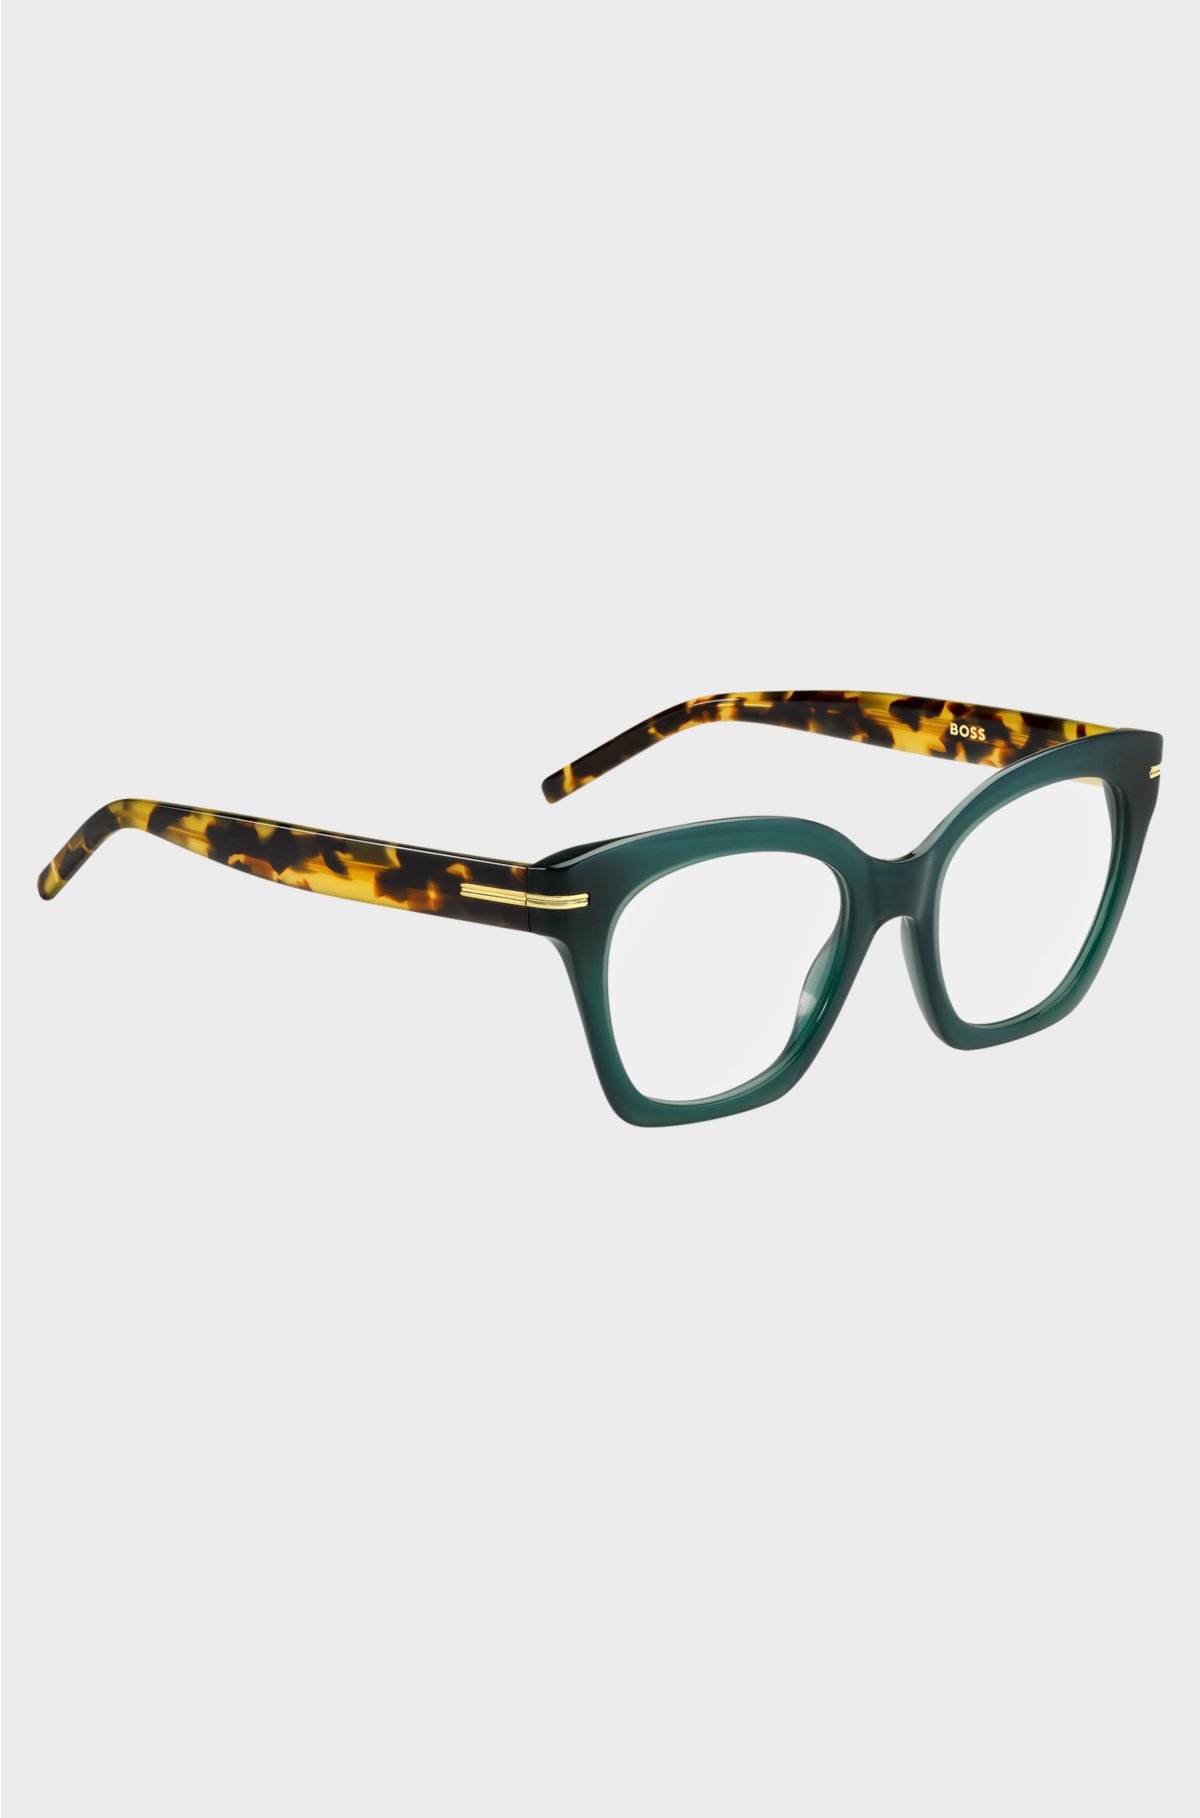 Green-acetate optical frames with Havana temples, Patterned